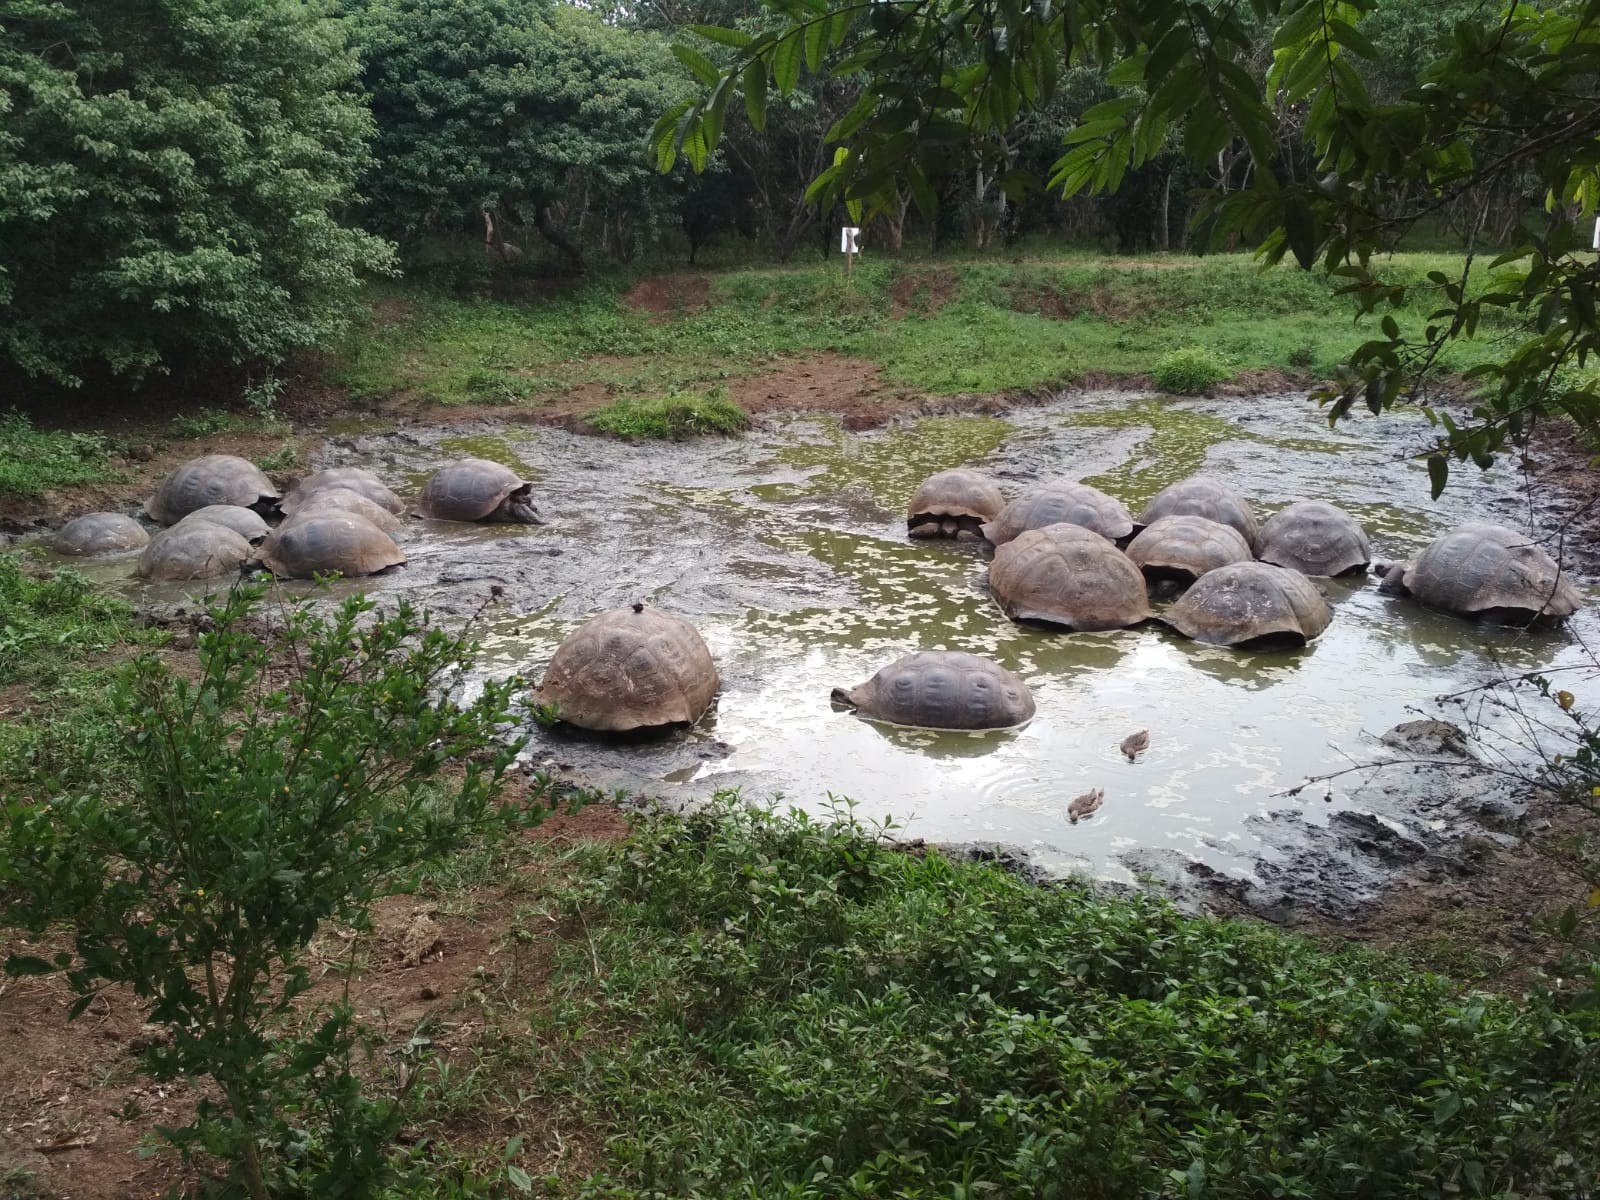 Several giant tortoises (representing tons of terrestrial biomass) and two white-cheeked pintail ducks actively using ponds in ranch’s area destined for touristic activities, in the humid highlands of Santa Cruz Island, Galapagos.